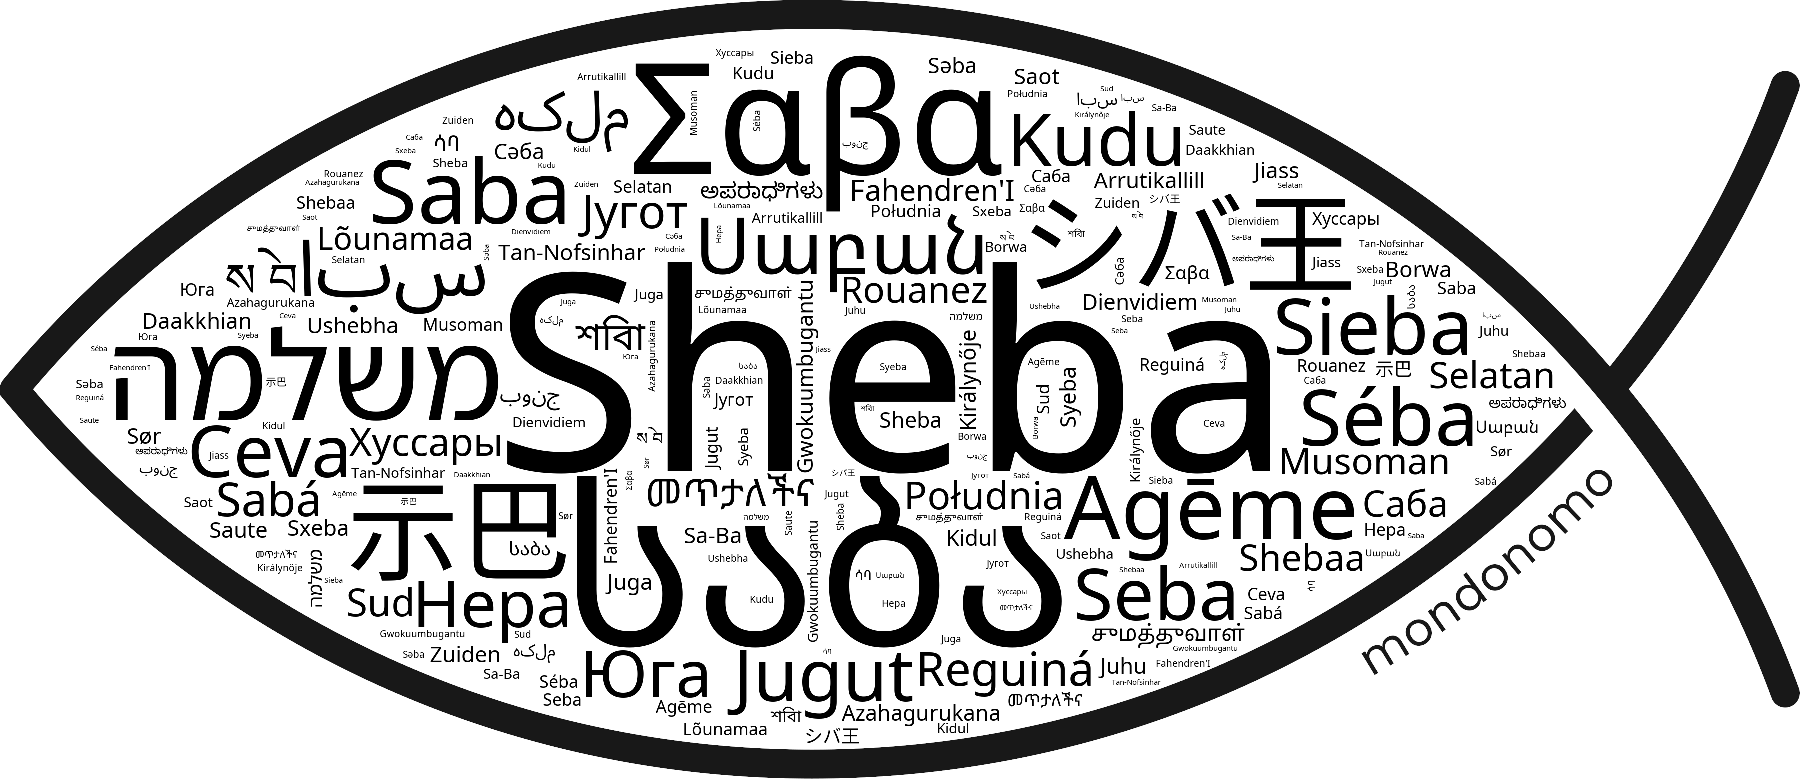 Name Sheba in the world's Bibles